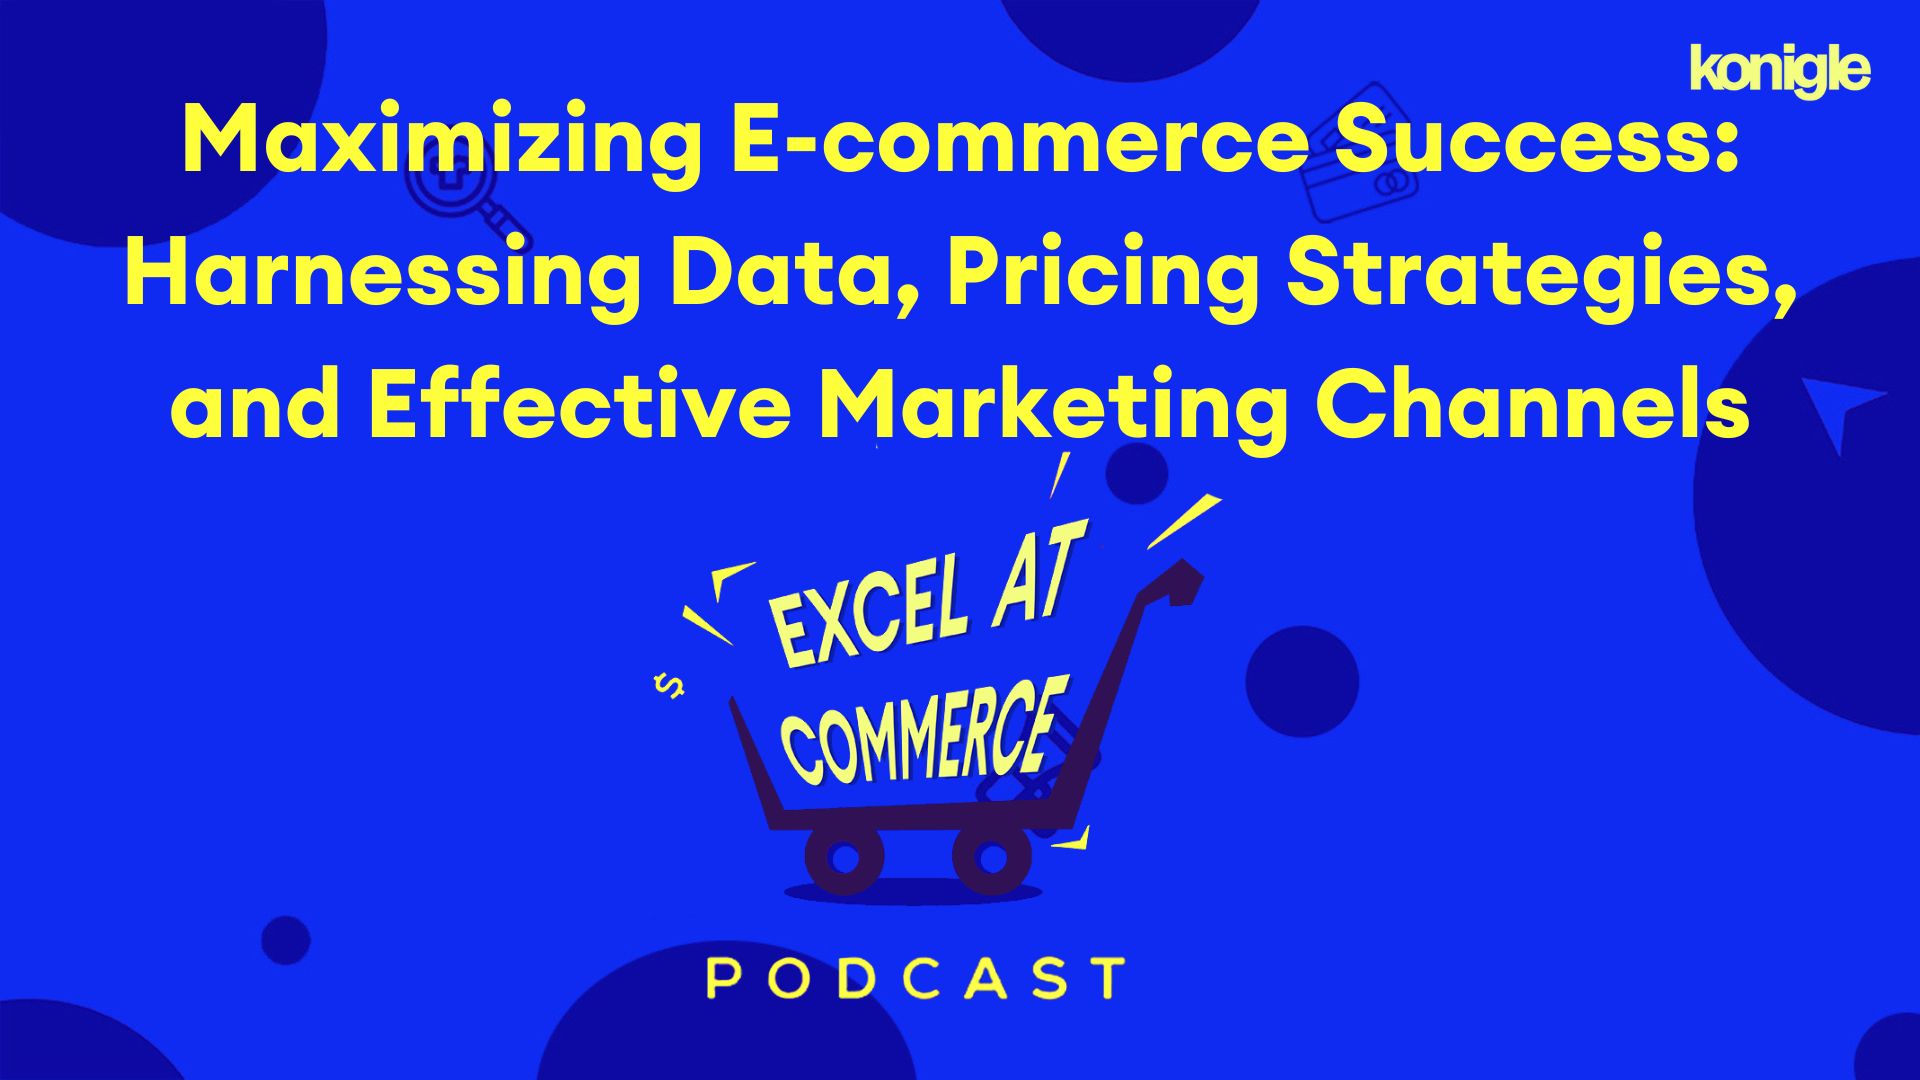 Maximizing E-commerce Success: Harnessing Data, Pricing Strategies, and Effective Marketing Channels